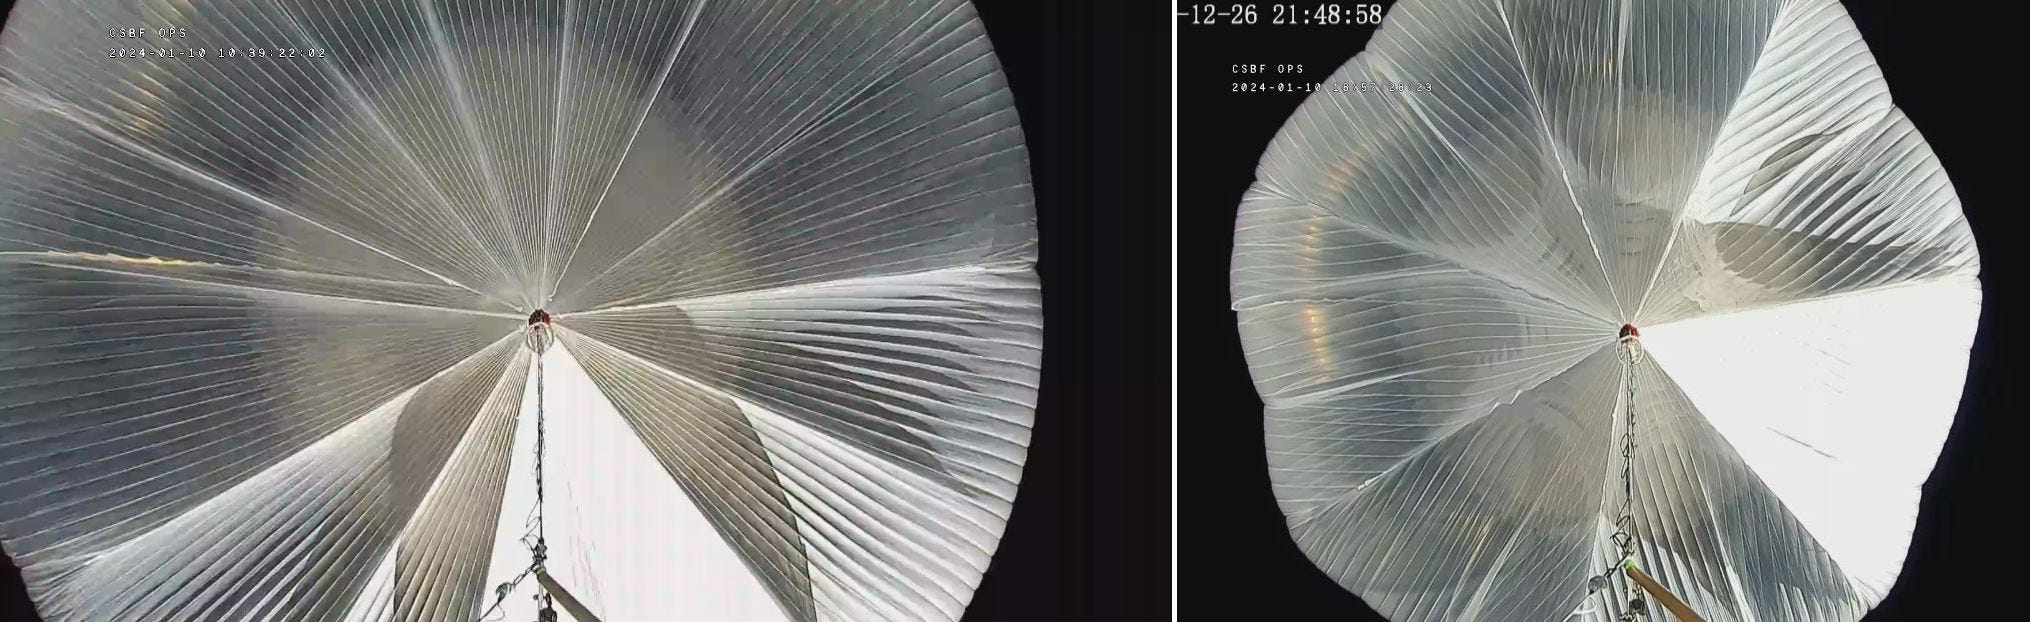 After seven hours of slow ascent the BIG60 balloon reached an altitude of 156.000 ft (Image at left) and was fully inflated, however by 19:00 utc the balloon lose more than 10.000 feet of altitude reaching 144.000 ft (image at right).